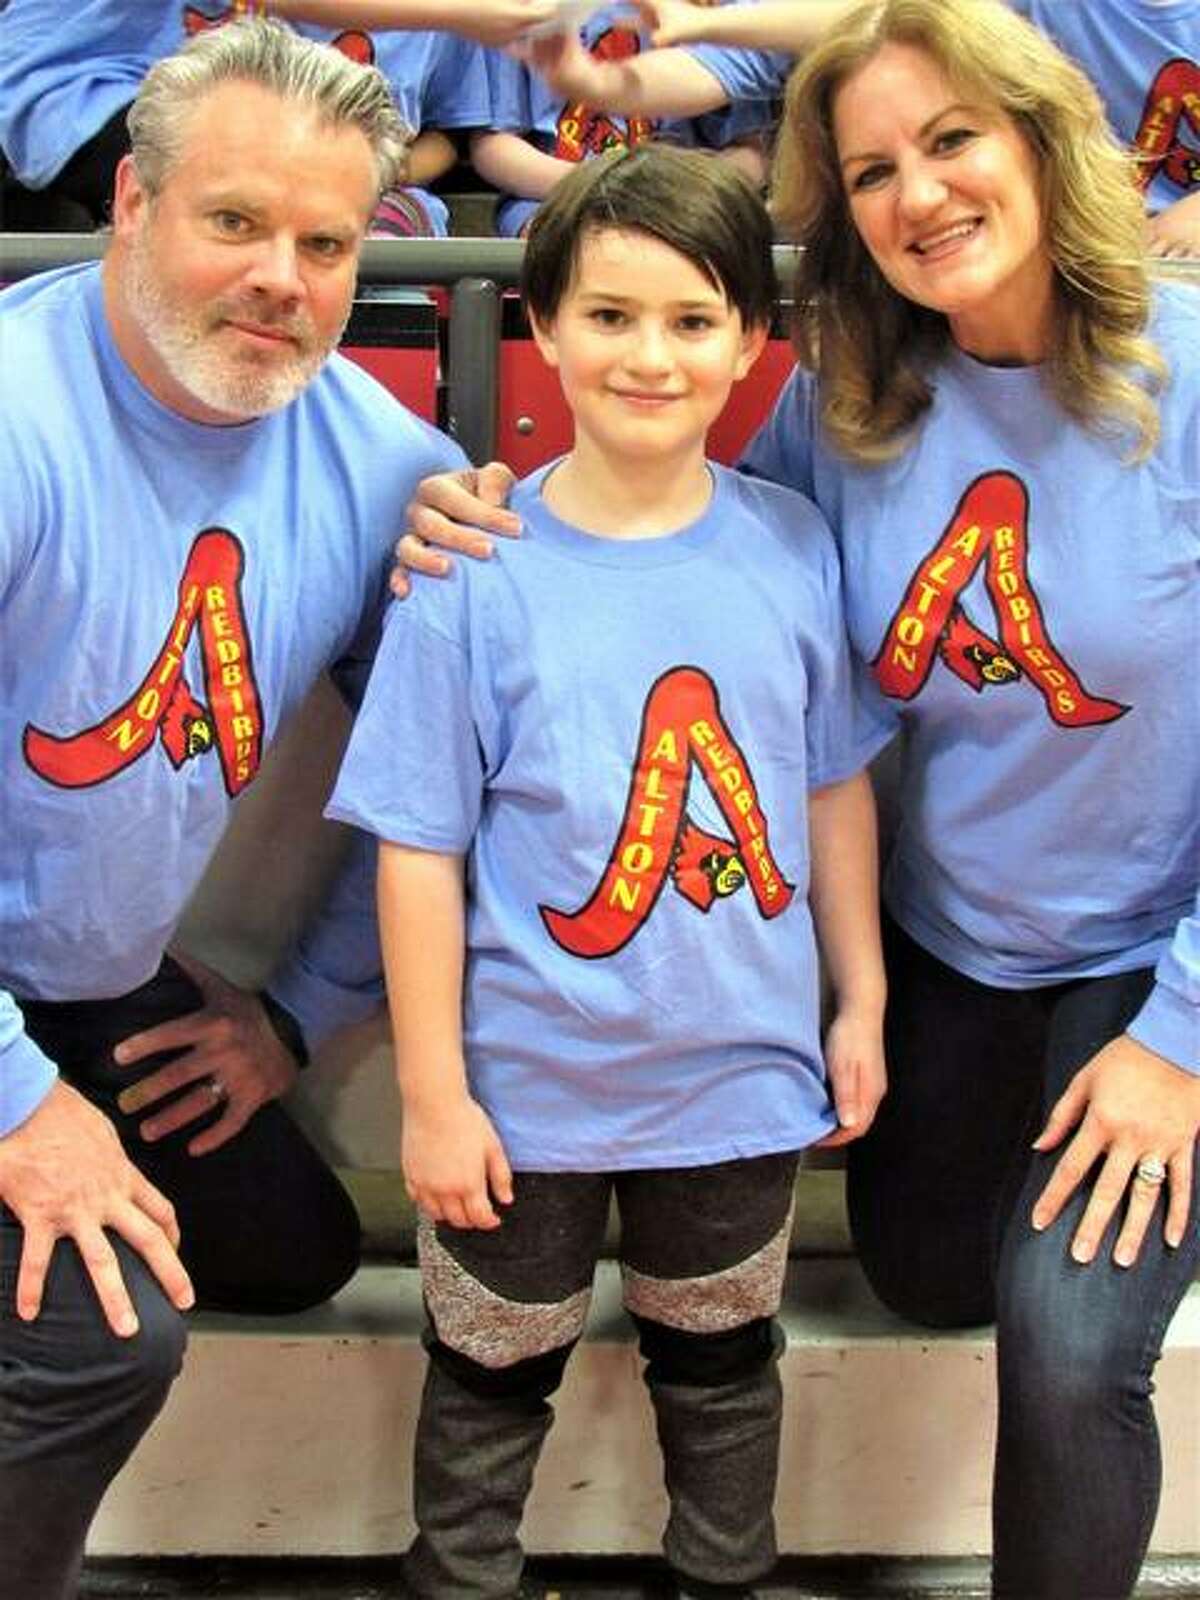 Vedder Obermeyer, along with his parents, Lance and Michelle Obermeyer, poses with the shirt he designed last year.